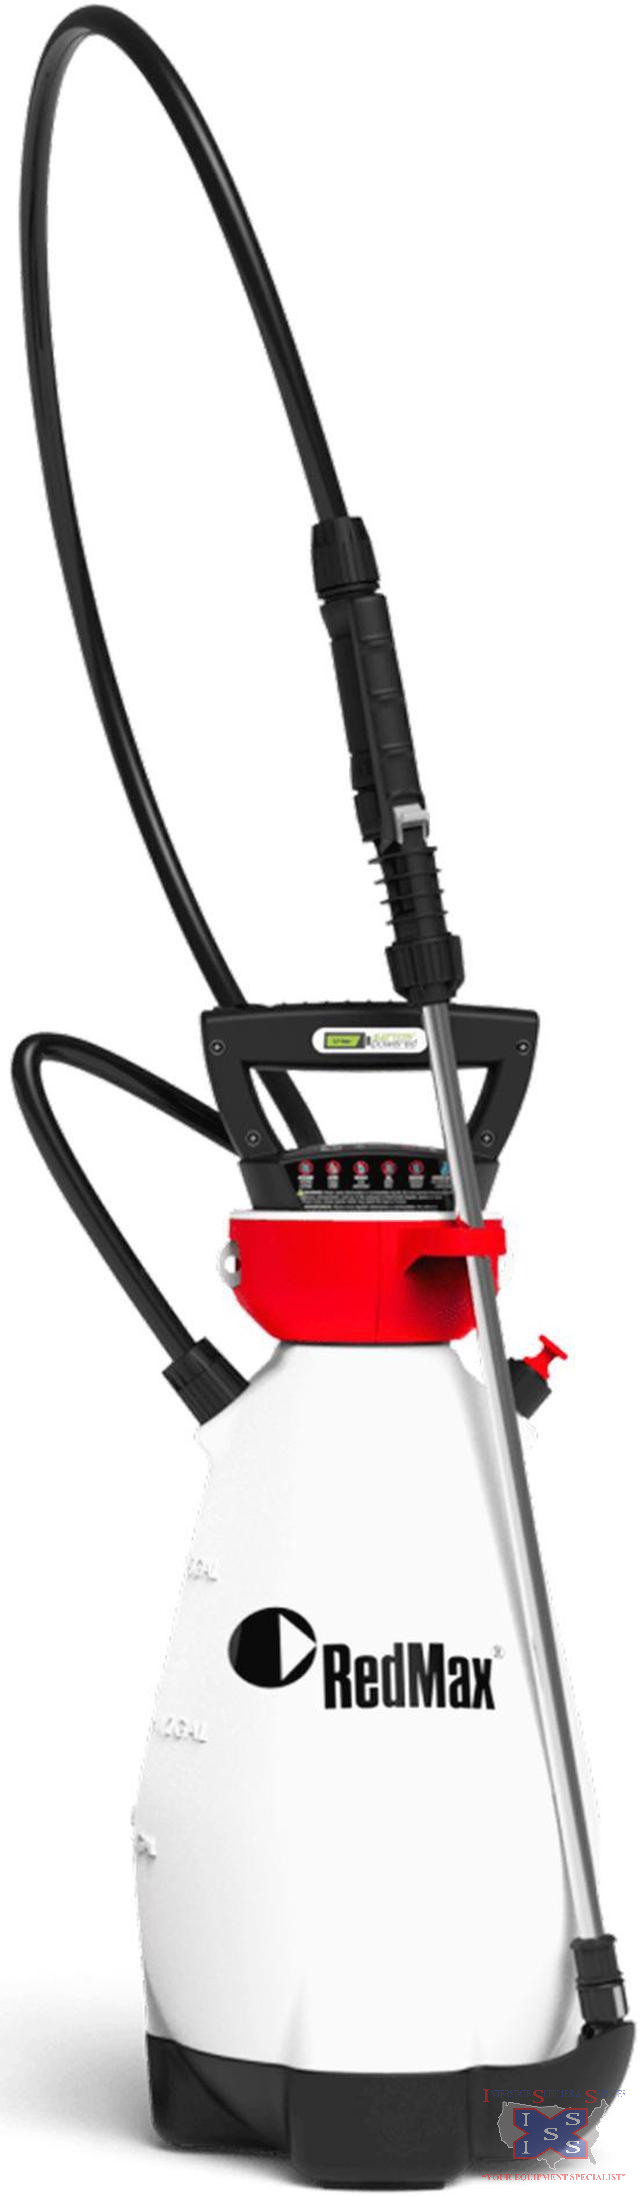 RedMax 2gal Battery Sprayer - Click Image to Close